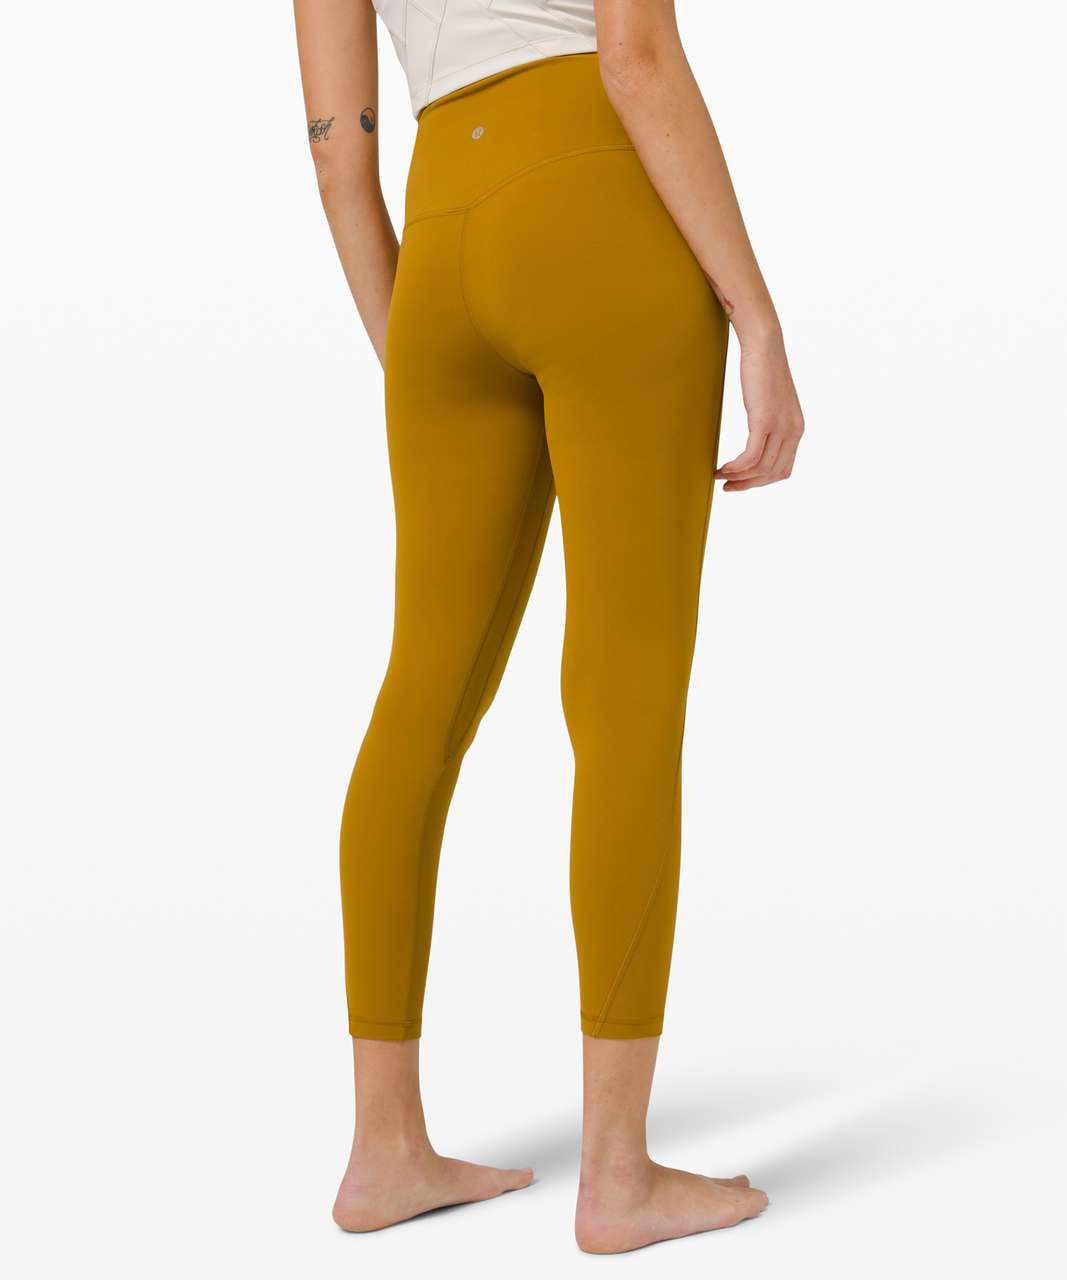 Lululemon Womens Size 16 Wunder Train High-Rise Tight 25 Gold Spice